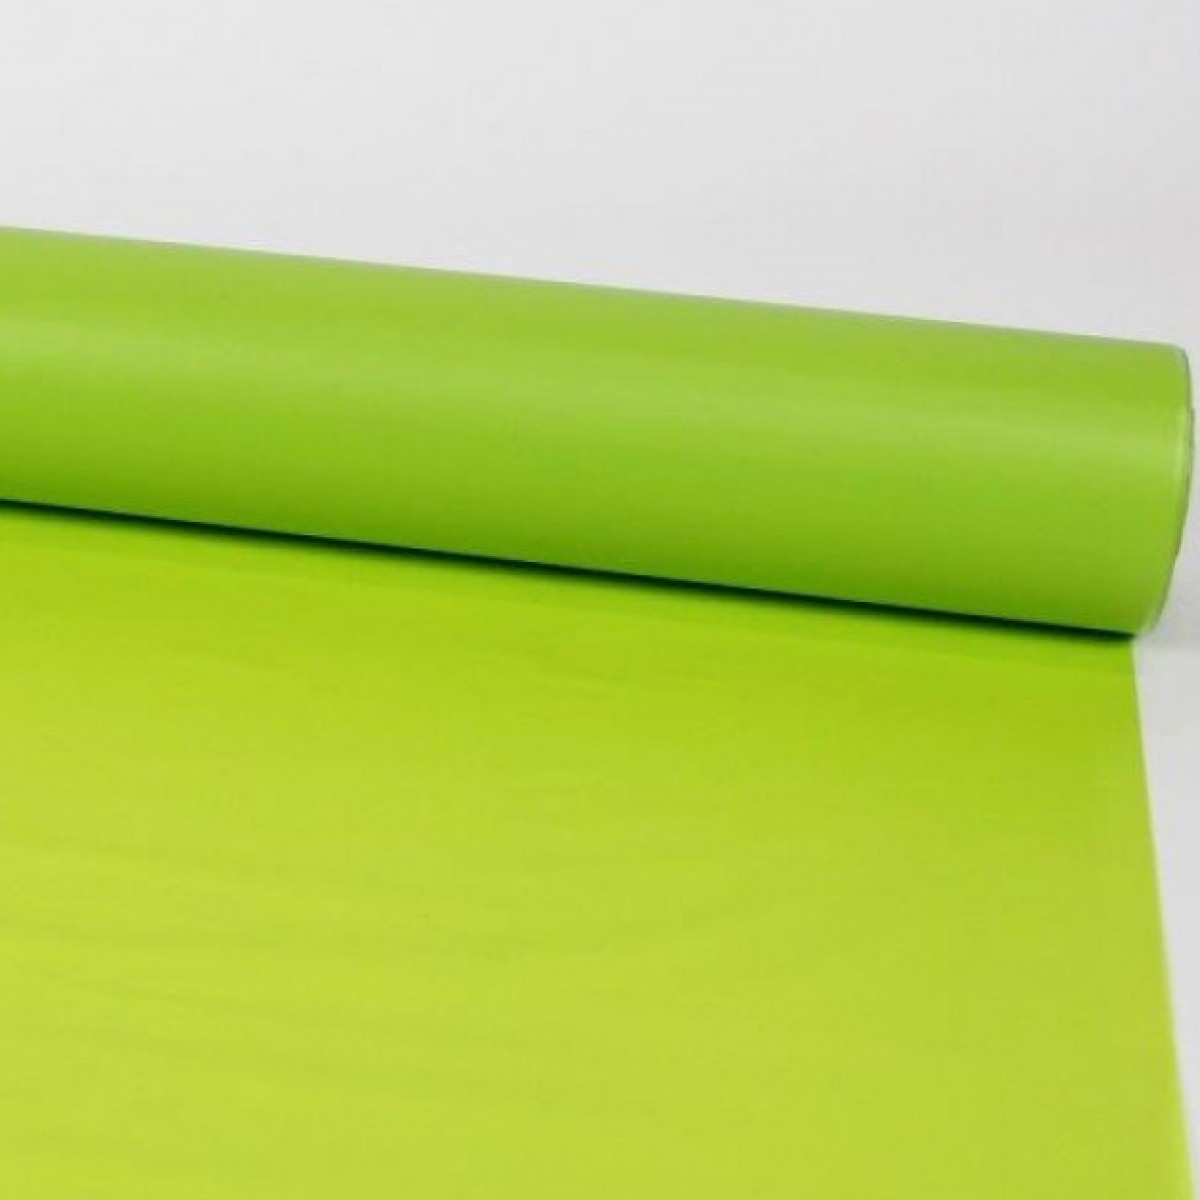 7045 Frosted Lime Green 80cmx25m 50mic Film - 1 Roll